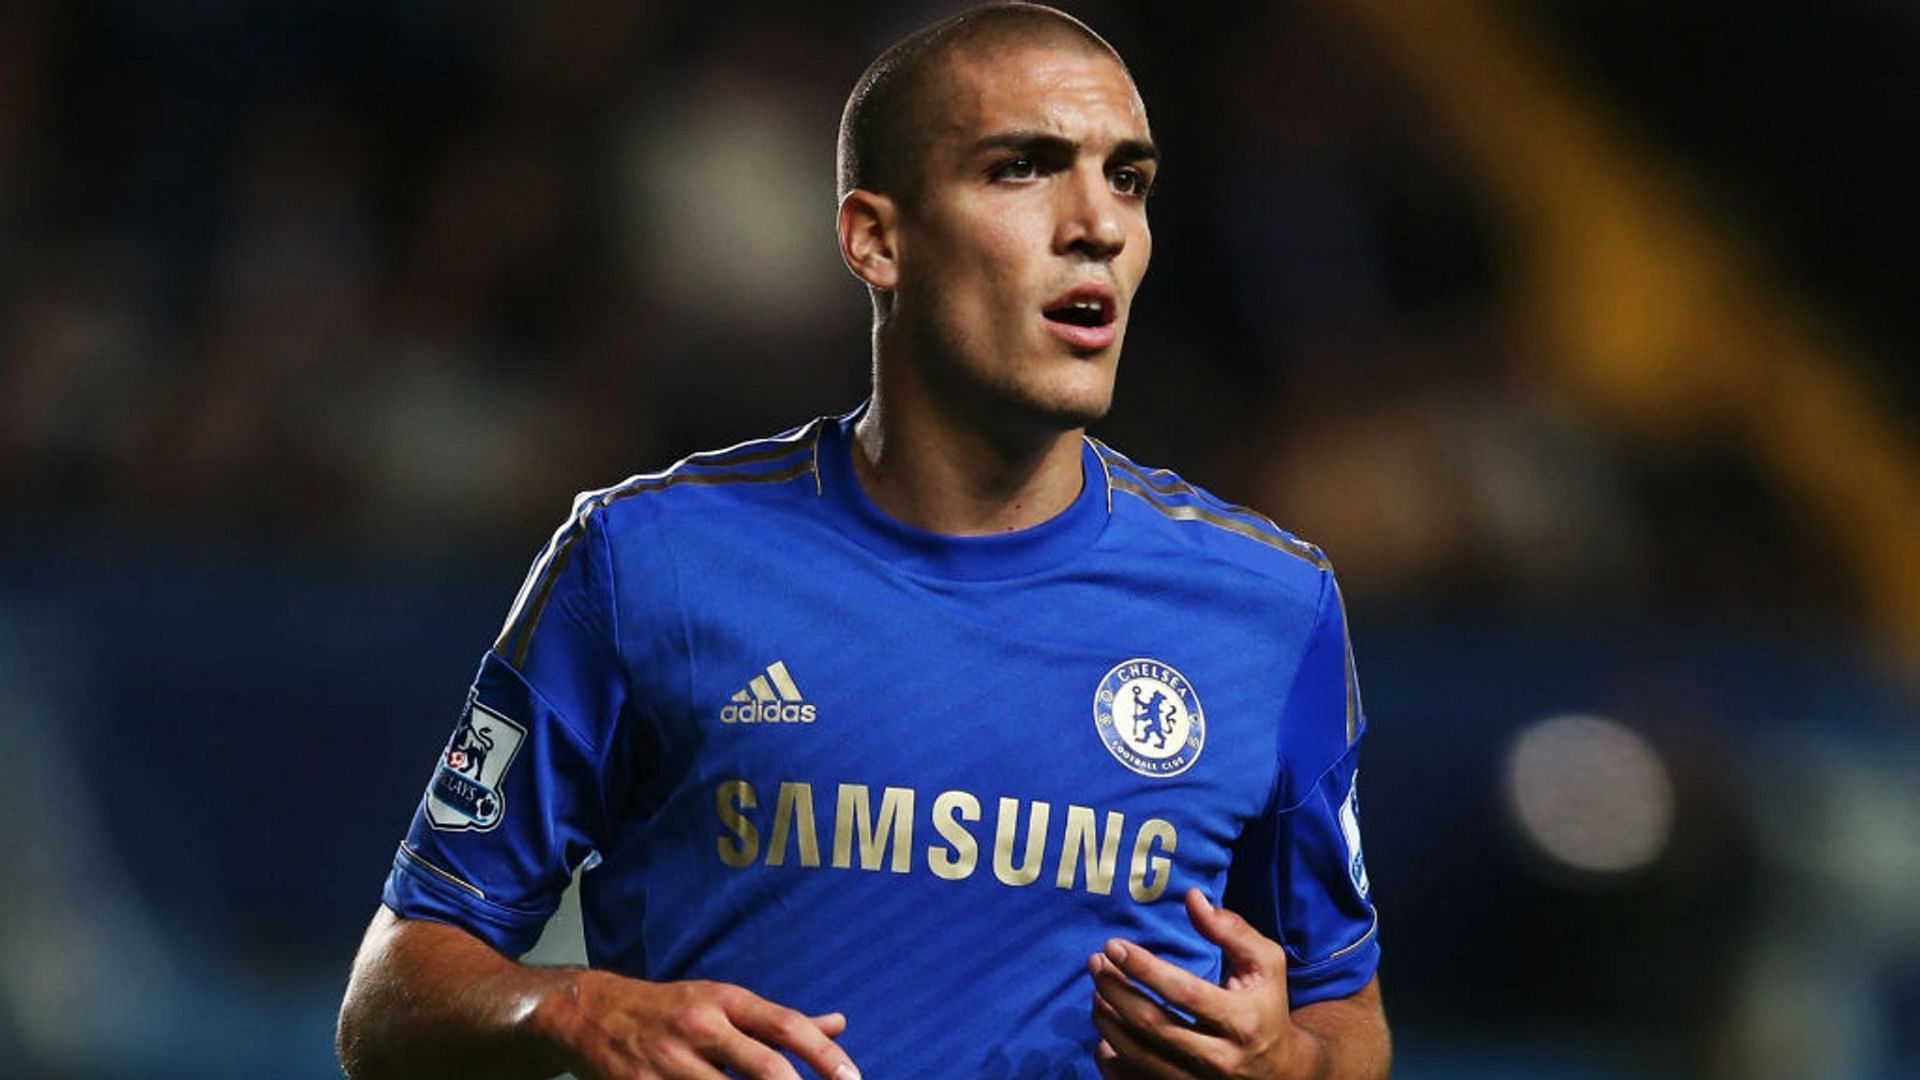 Oriol Romeu has played over 200 times for Southampton